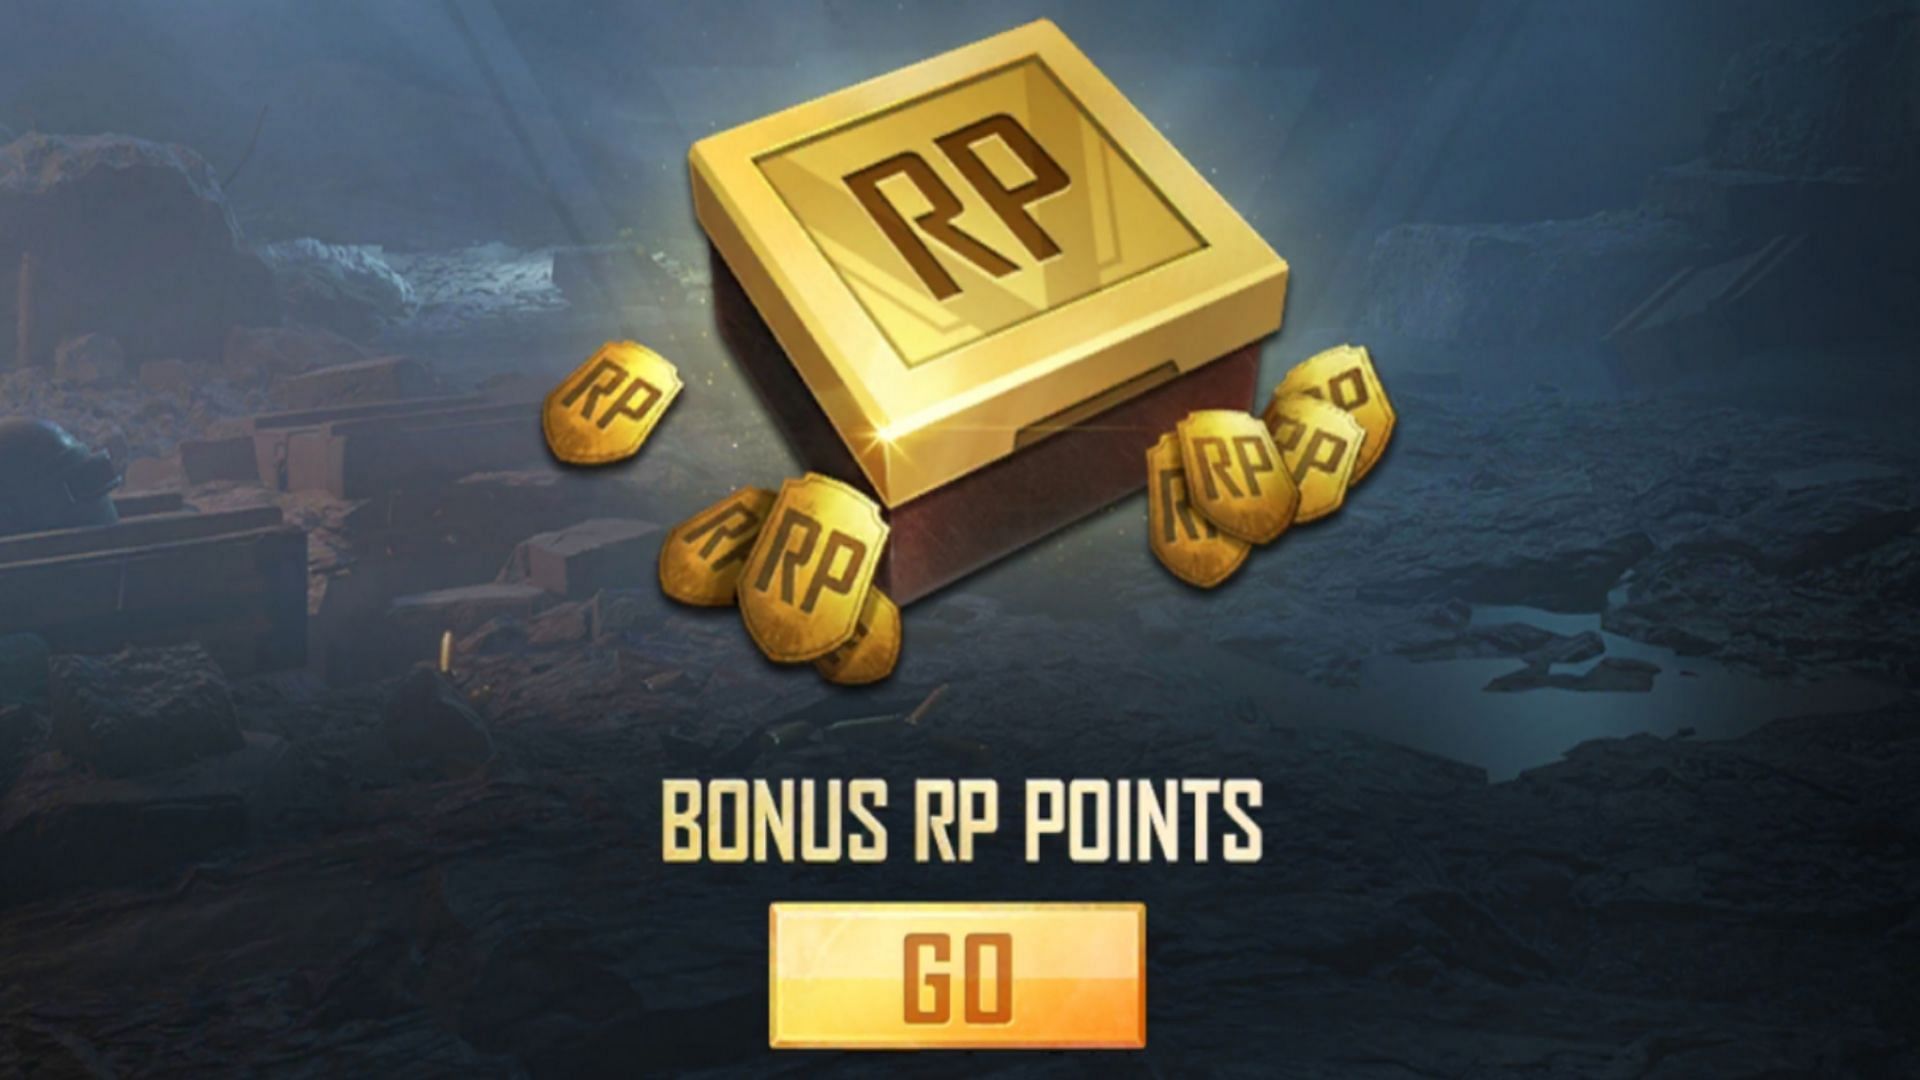 BGMI players can obtain A1 RP Points for free (Image via Krafton) 